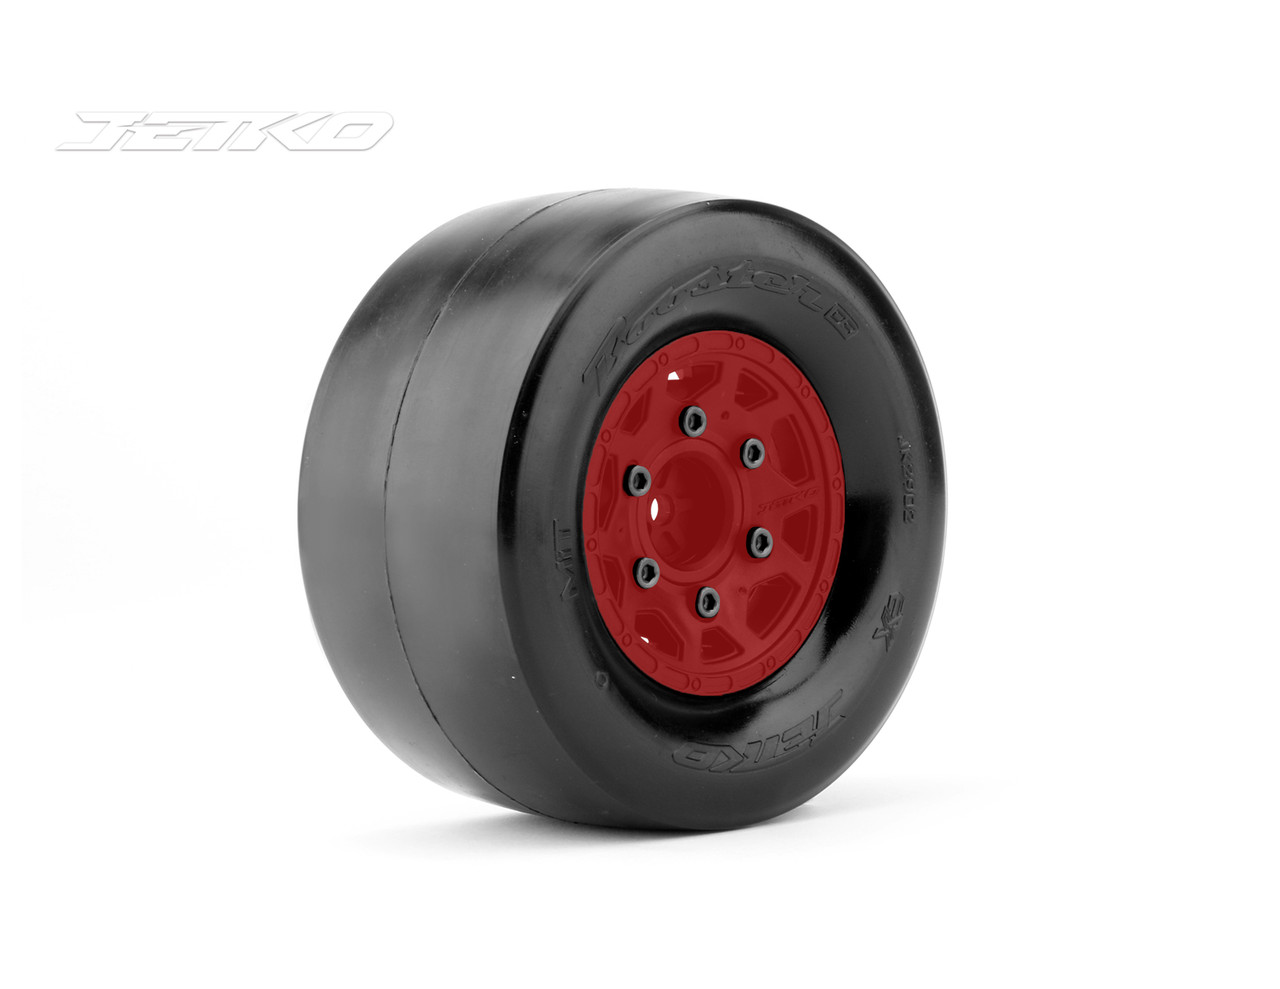 Jetko 1/10 DR Booster RR Narrow Rear Tires, Ultra Soft, Belted, Mounted on Red Claw Rims, 0 Offset